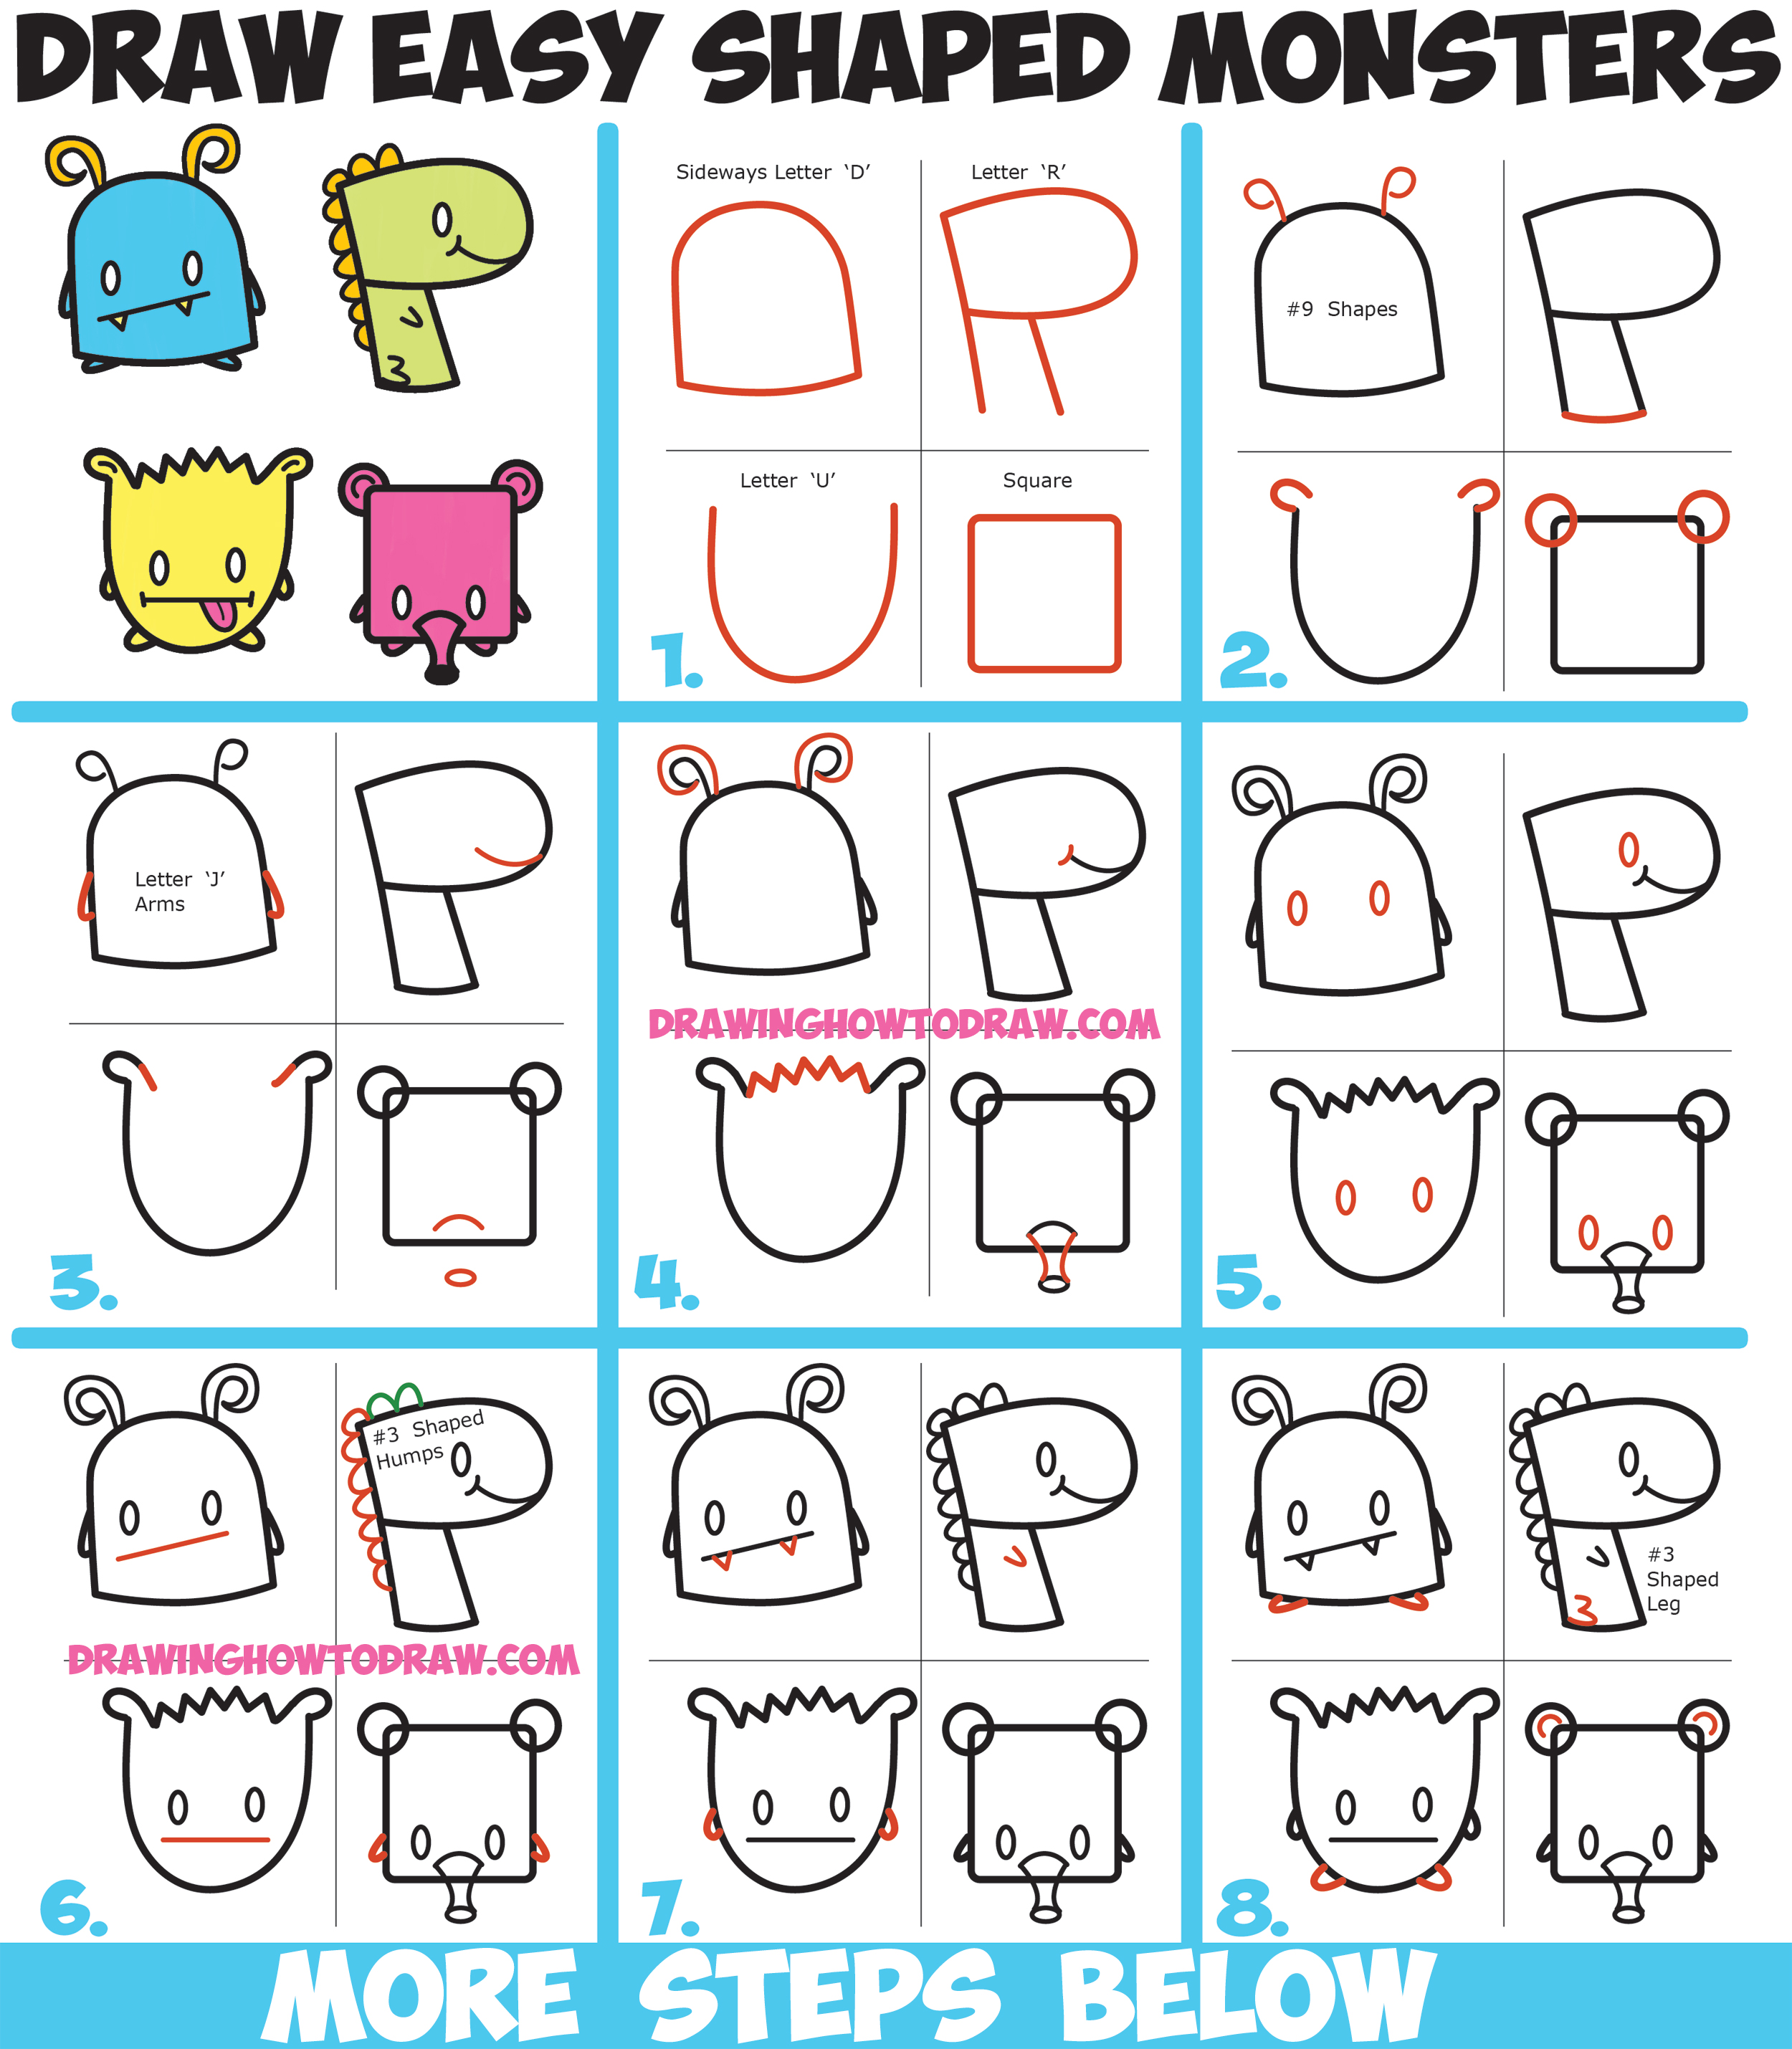 How to Draw Cute Cartoon Monsters from Simple Shapes, Letters and